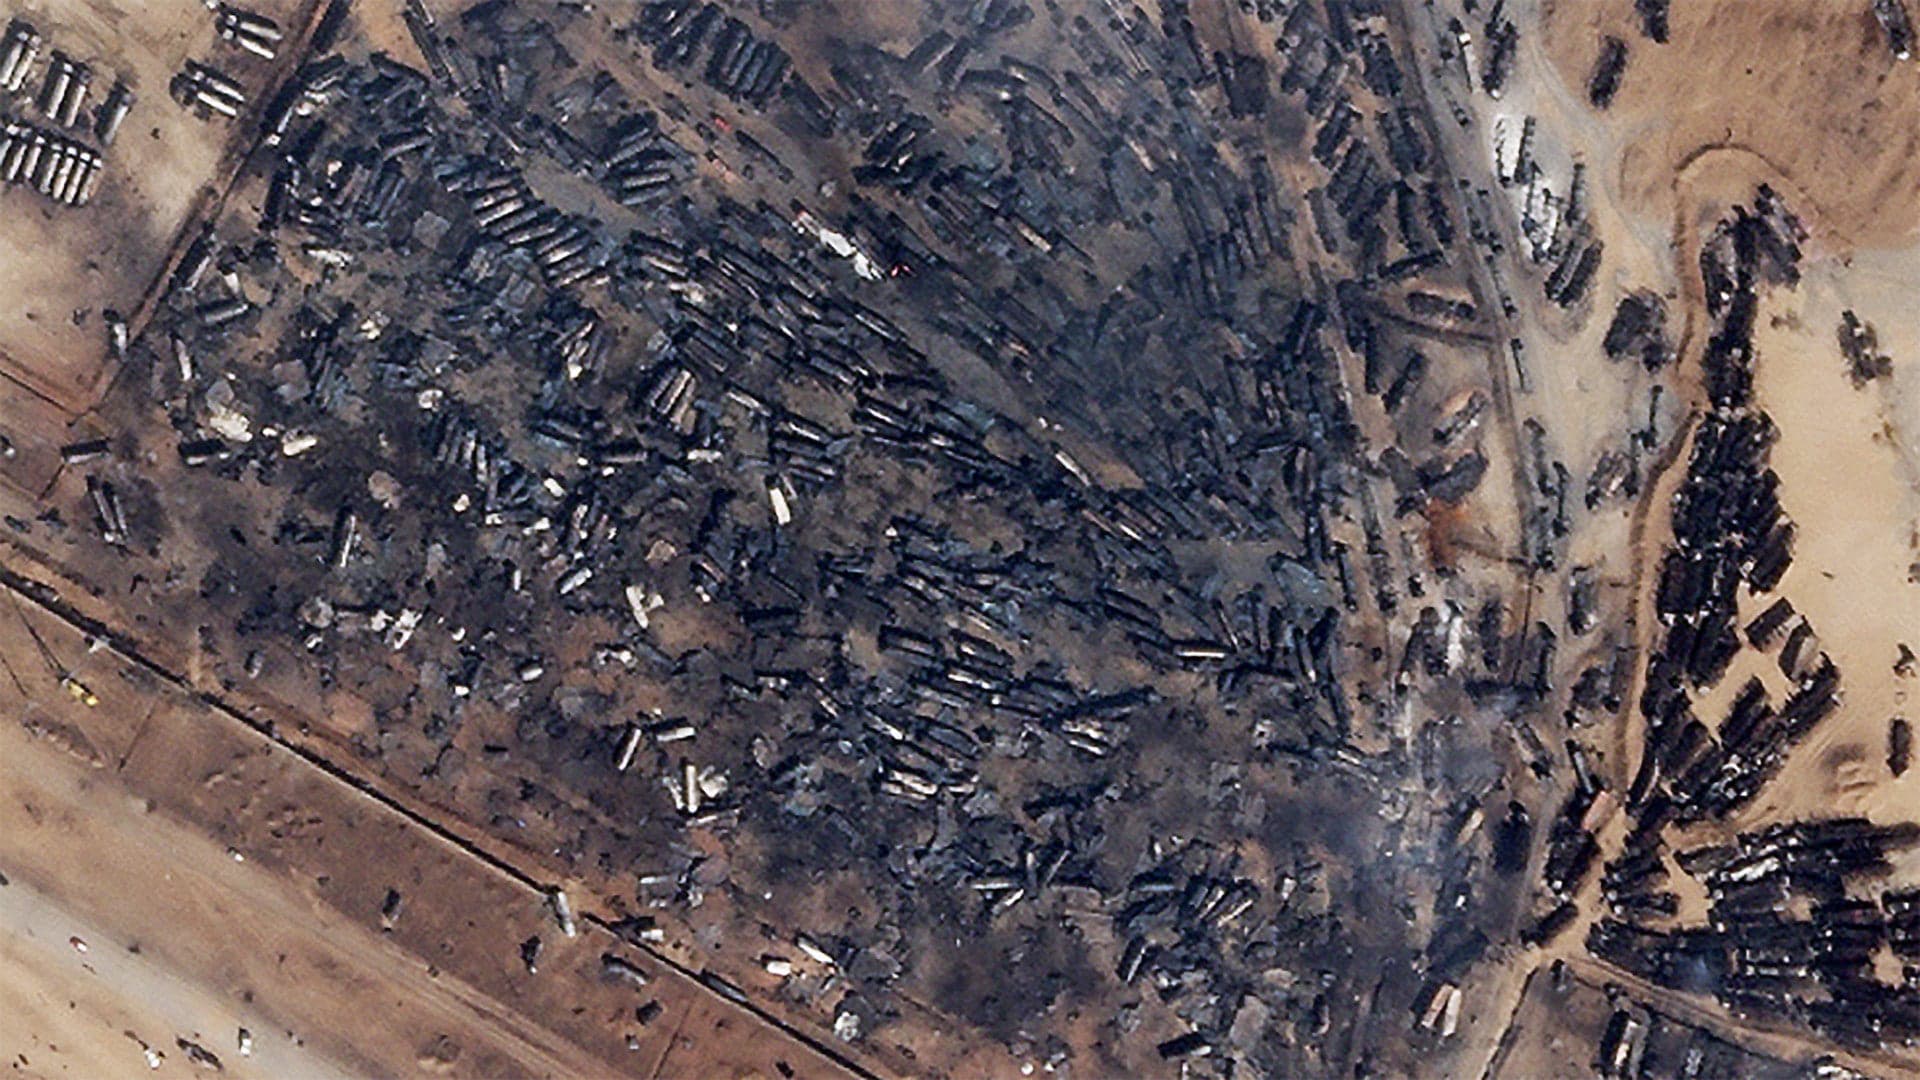 Satellite Images Show Horrible Aftermath Of Explosion That Burned Hundreds Of Trucks In Afghanistan